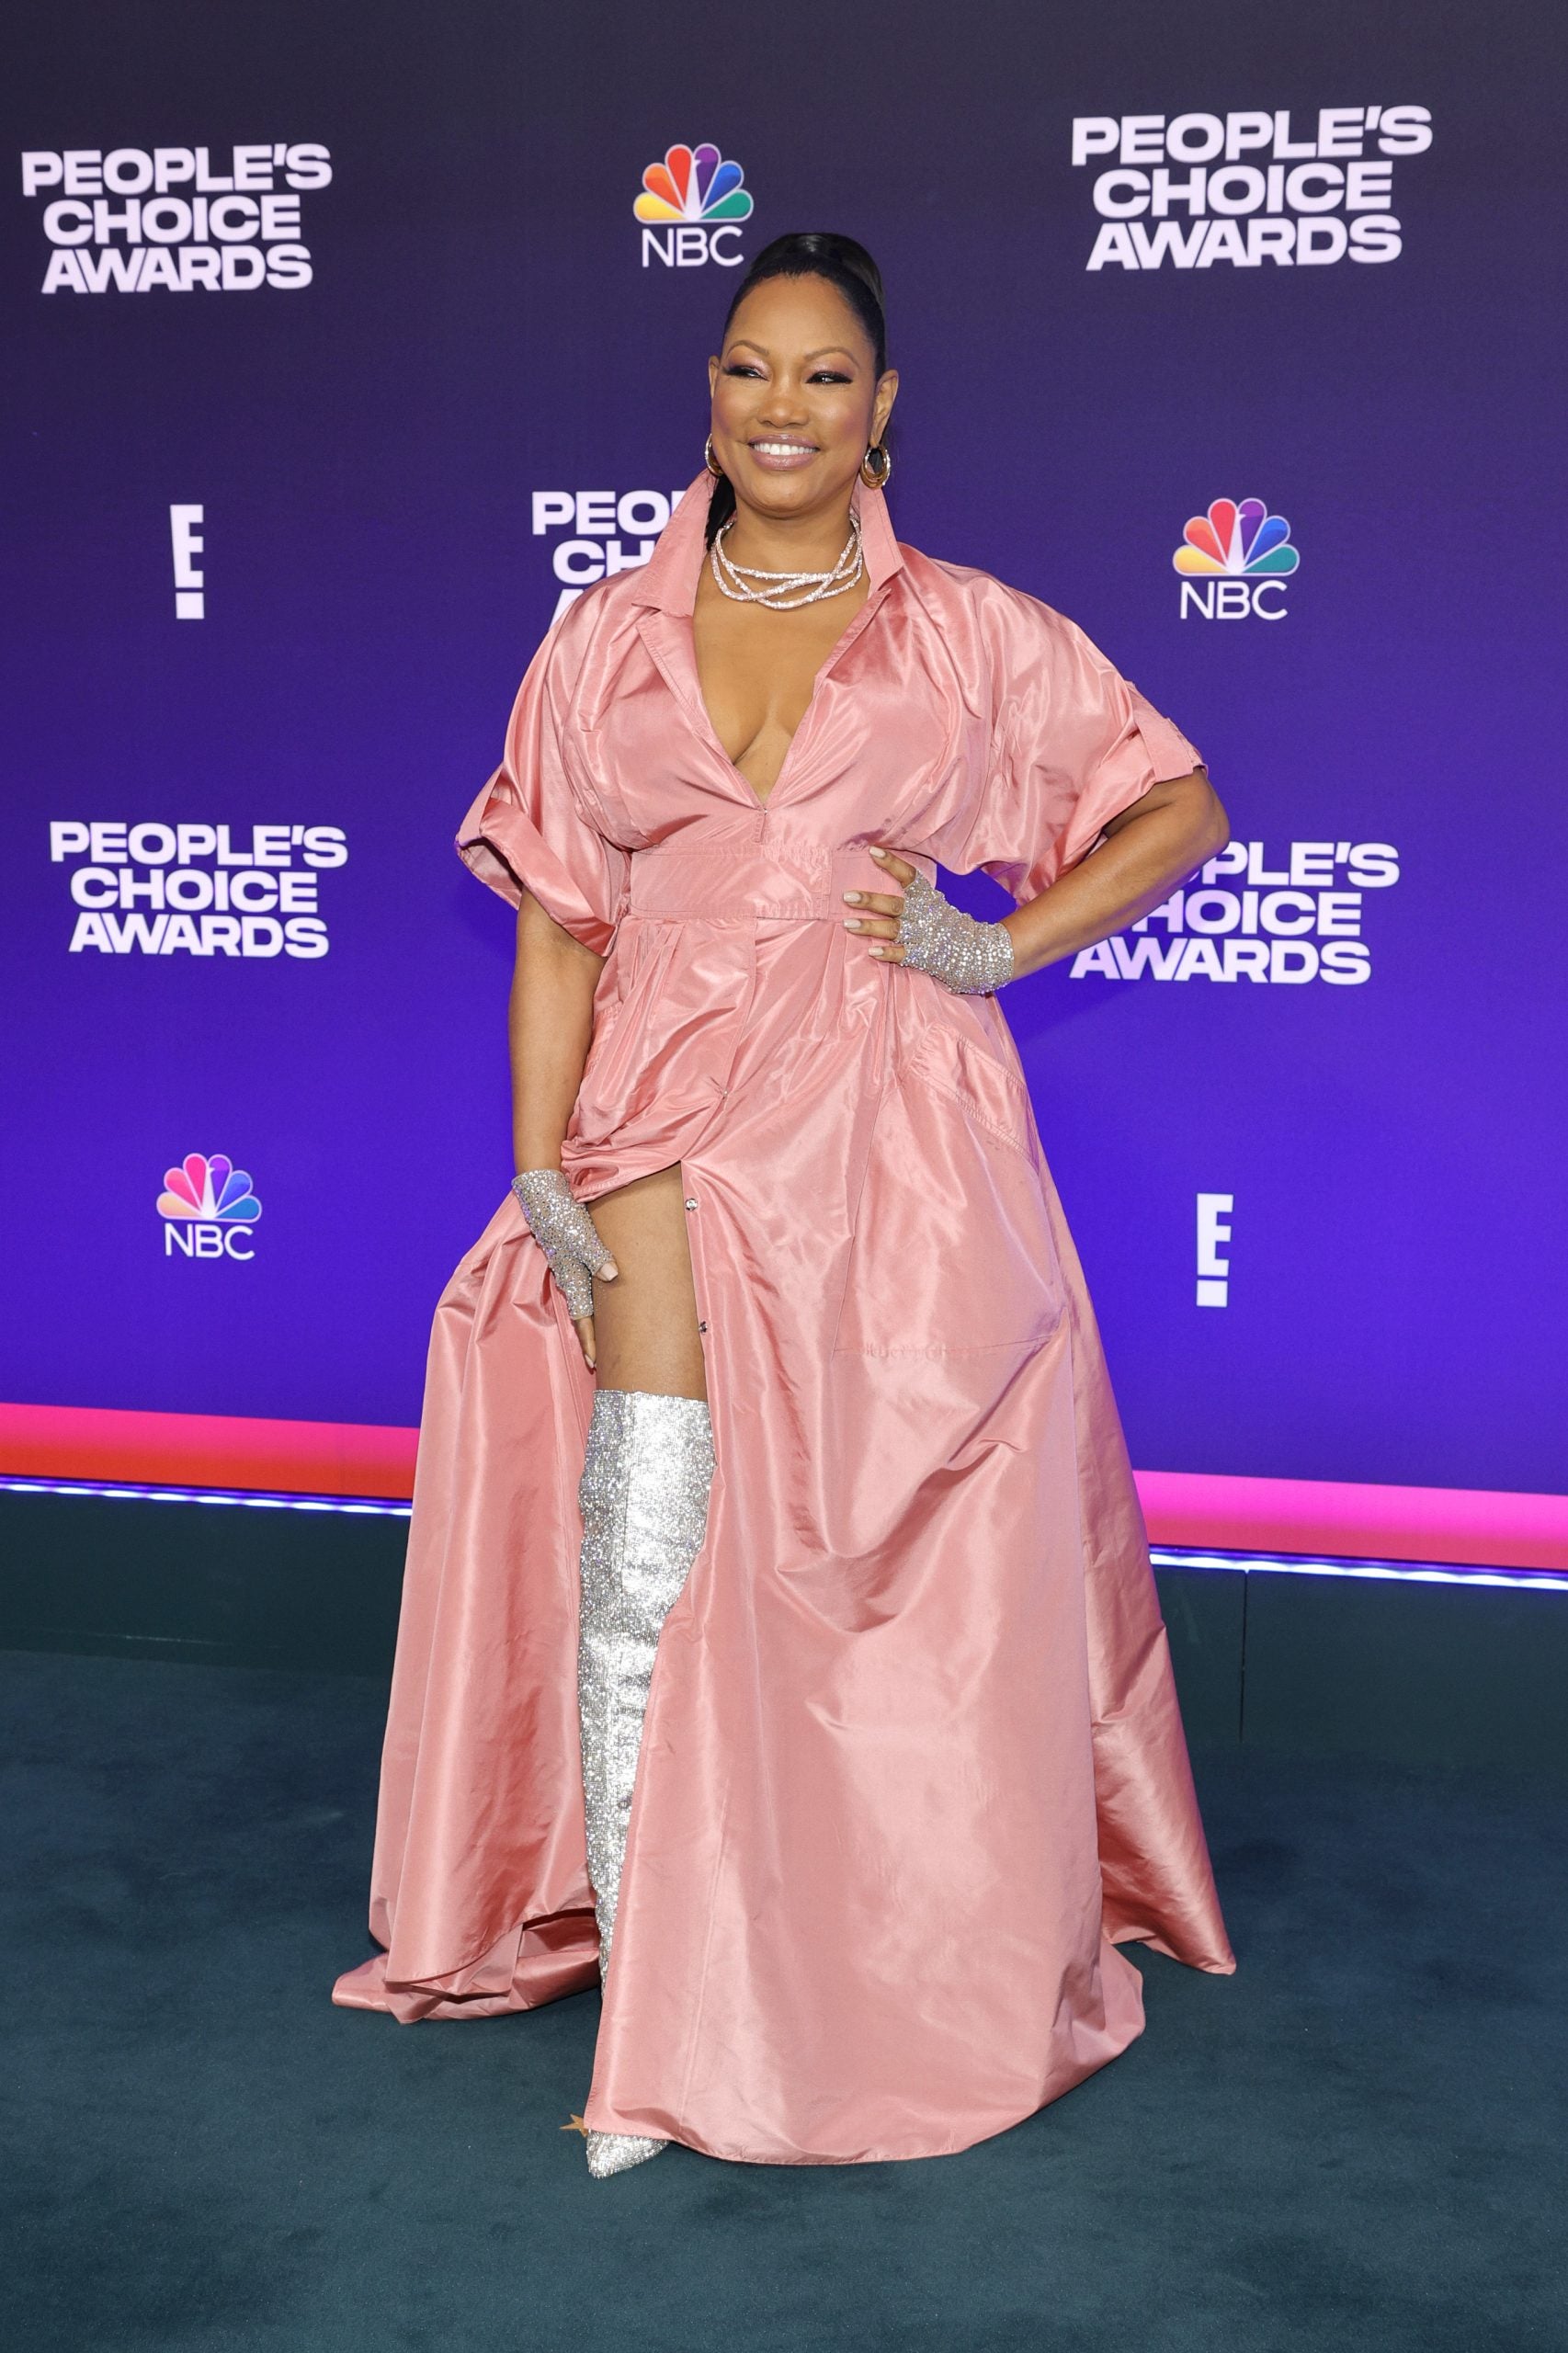 Stars Dazzled On The Red Carpet Of The 2021 E! People's Choice Awards